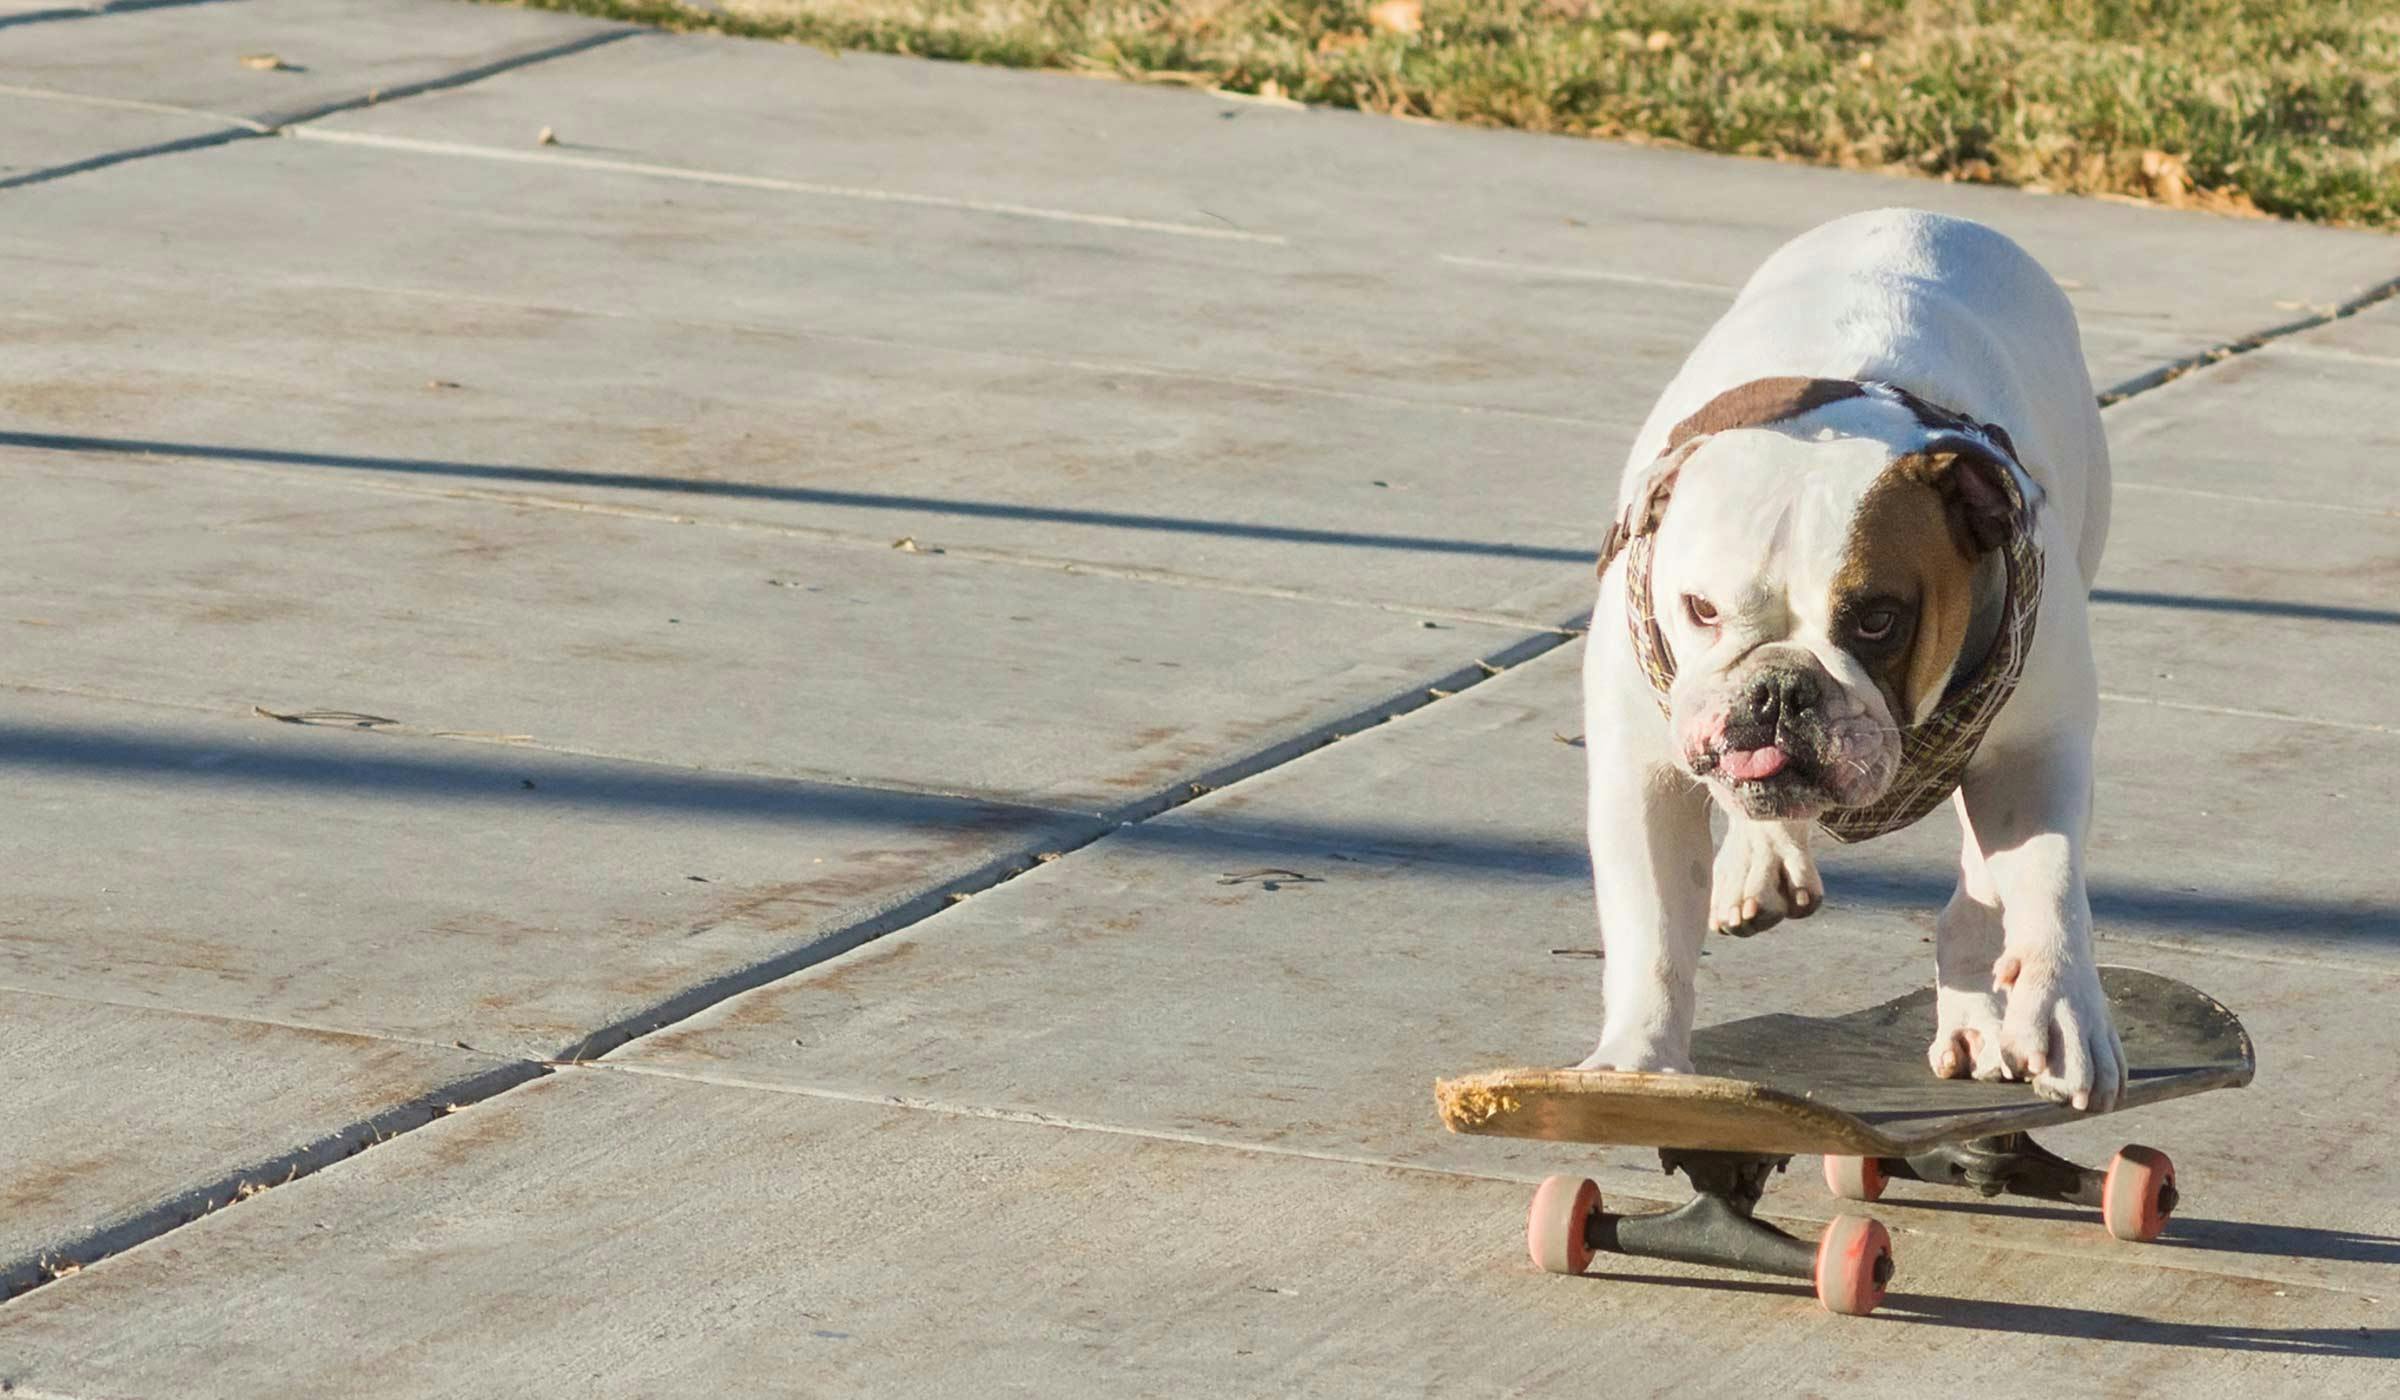 How to Train Your Dog to Pull a Skateboard | Wag!